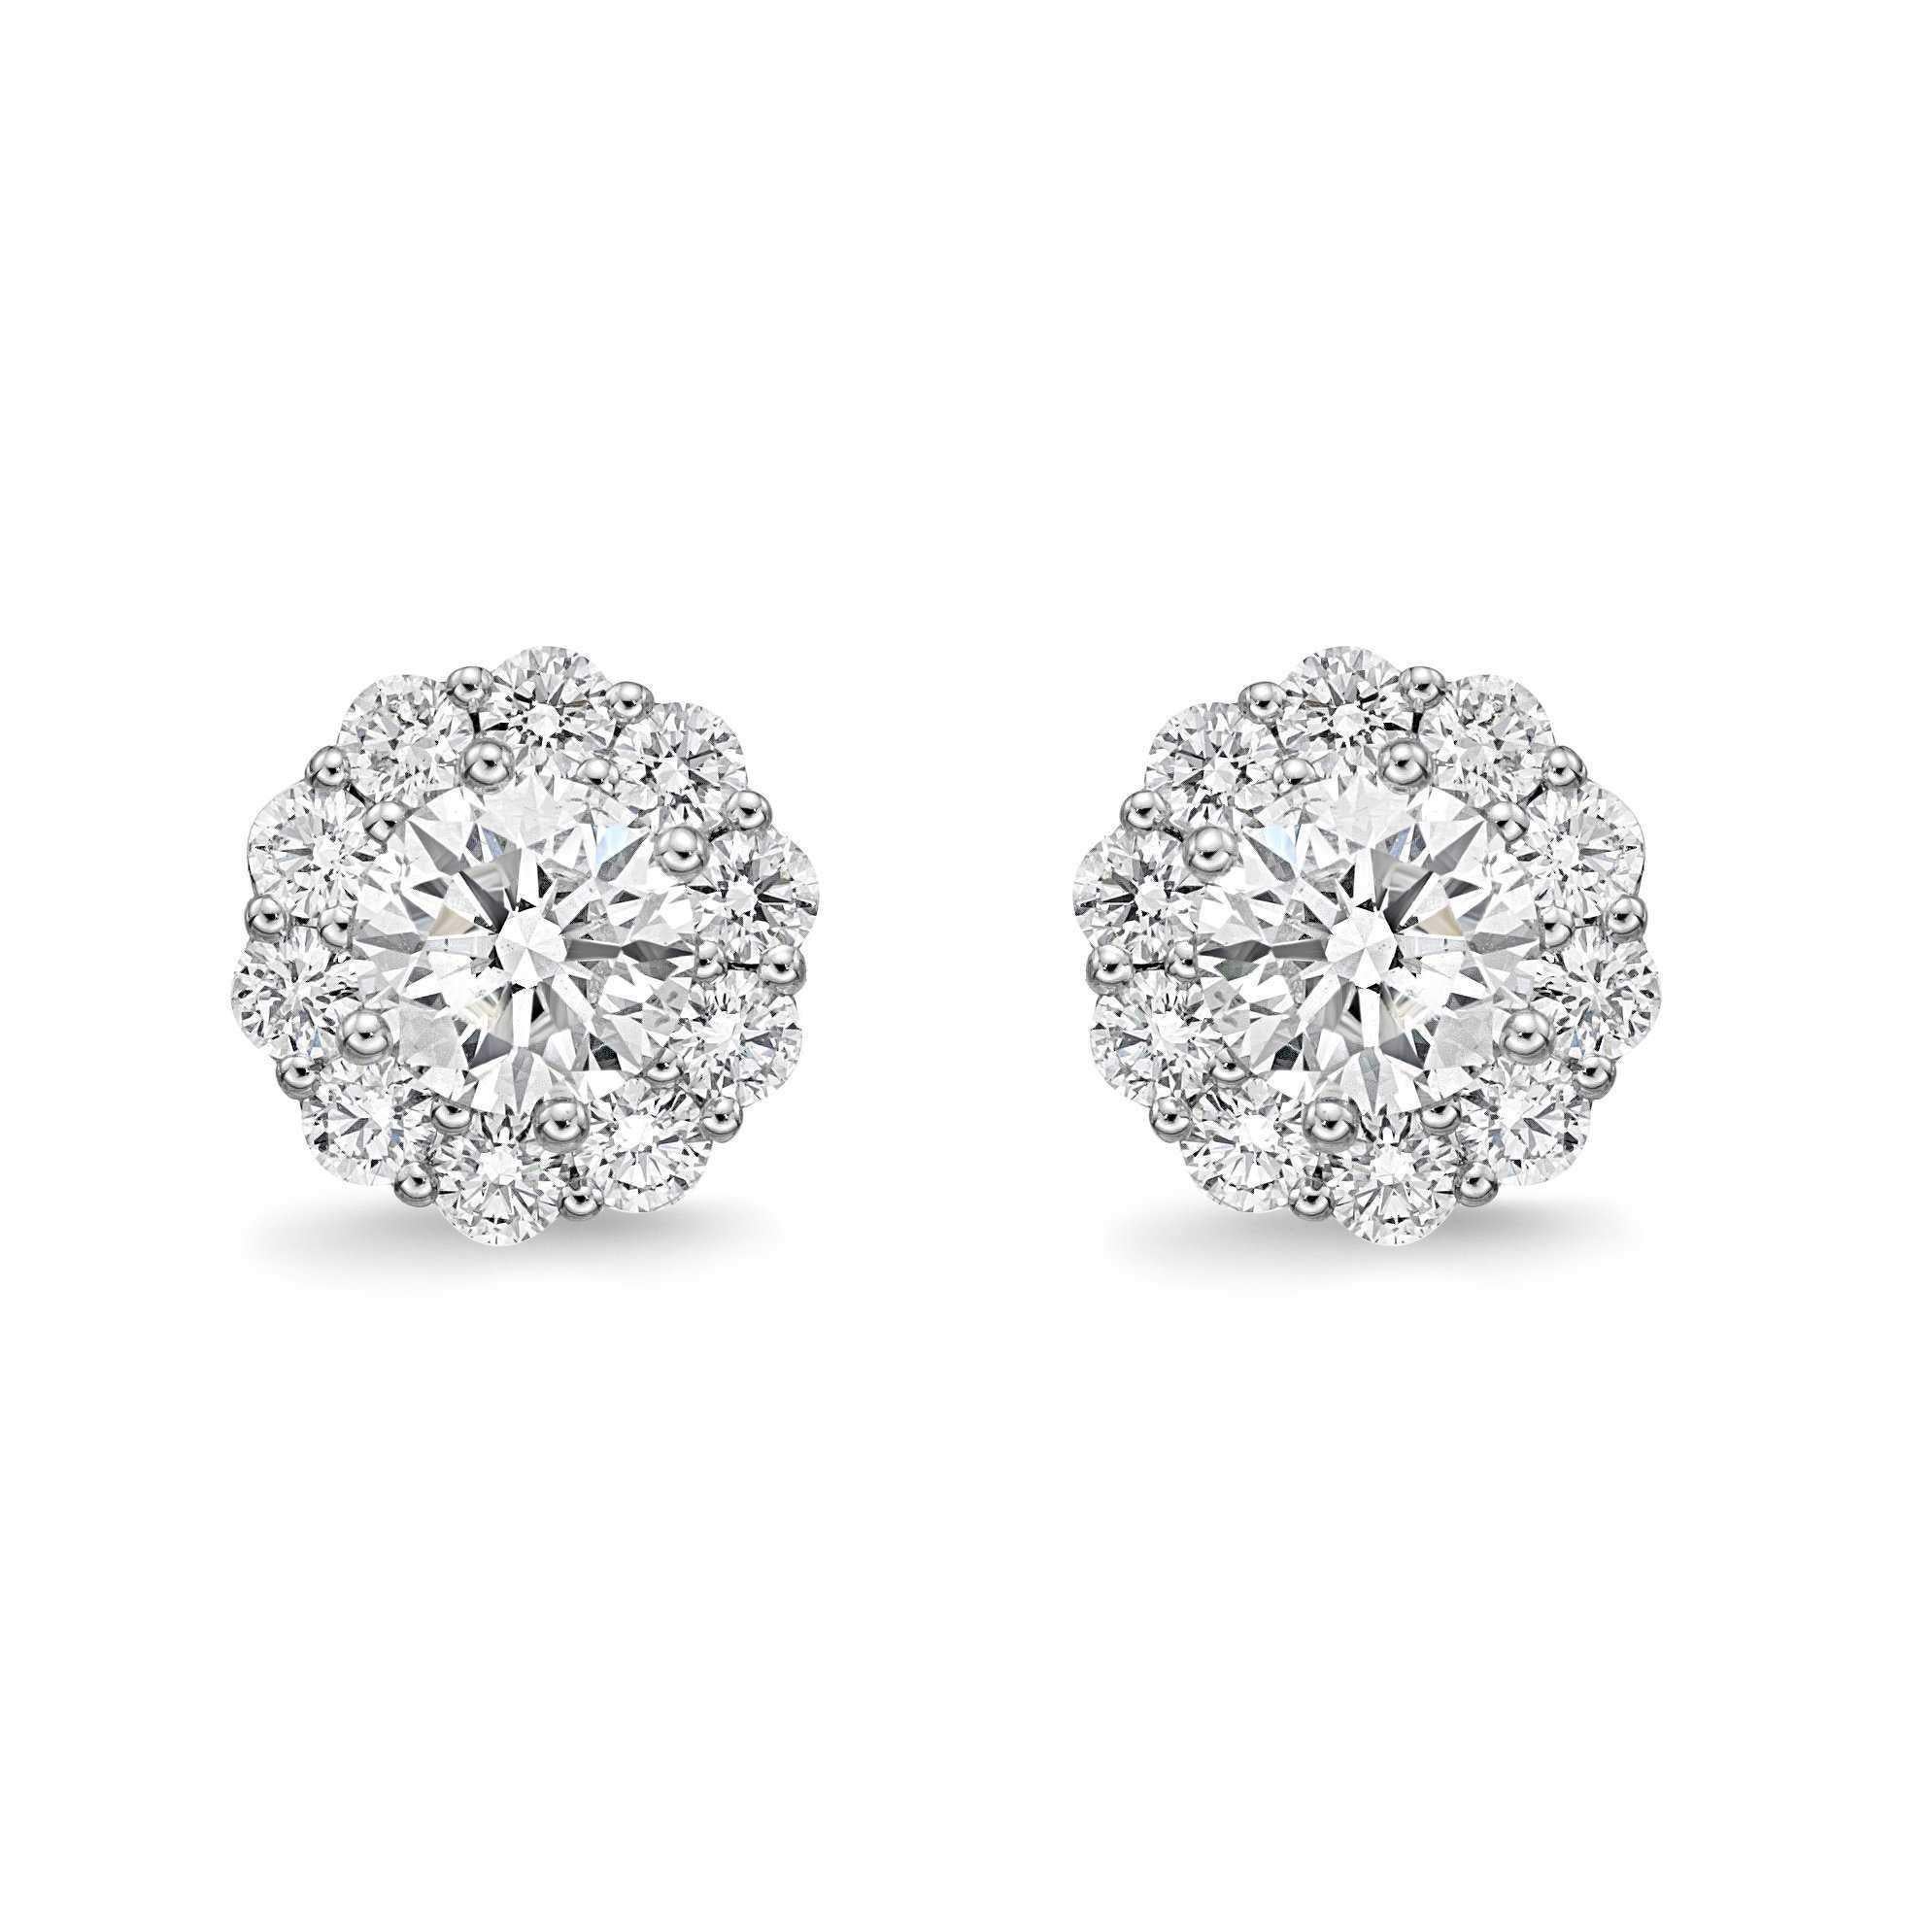 The Memoire Blossom Collection Diamond Earrings feature 22 diamonds with a combined weight of 1.52cts t.w., set in 18K White Gold. With a G-H Color and SI1 Clarity, these earrings offer an Ideal Cut and measure 9mm in diameter.